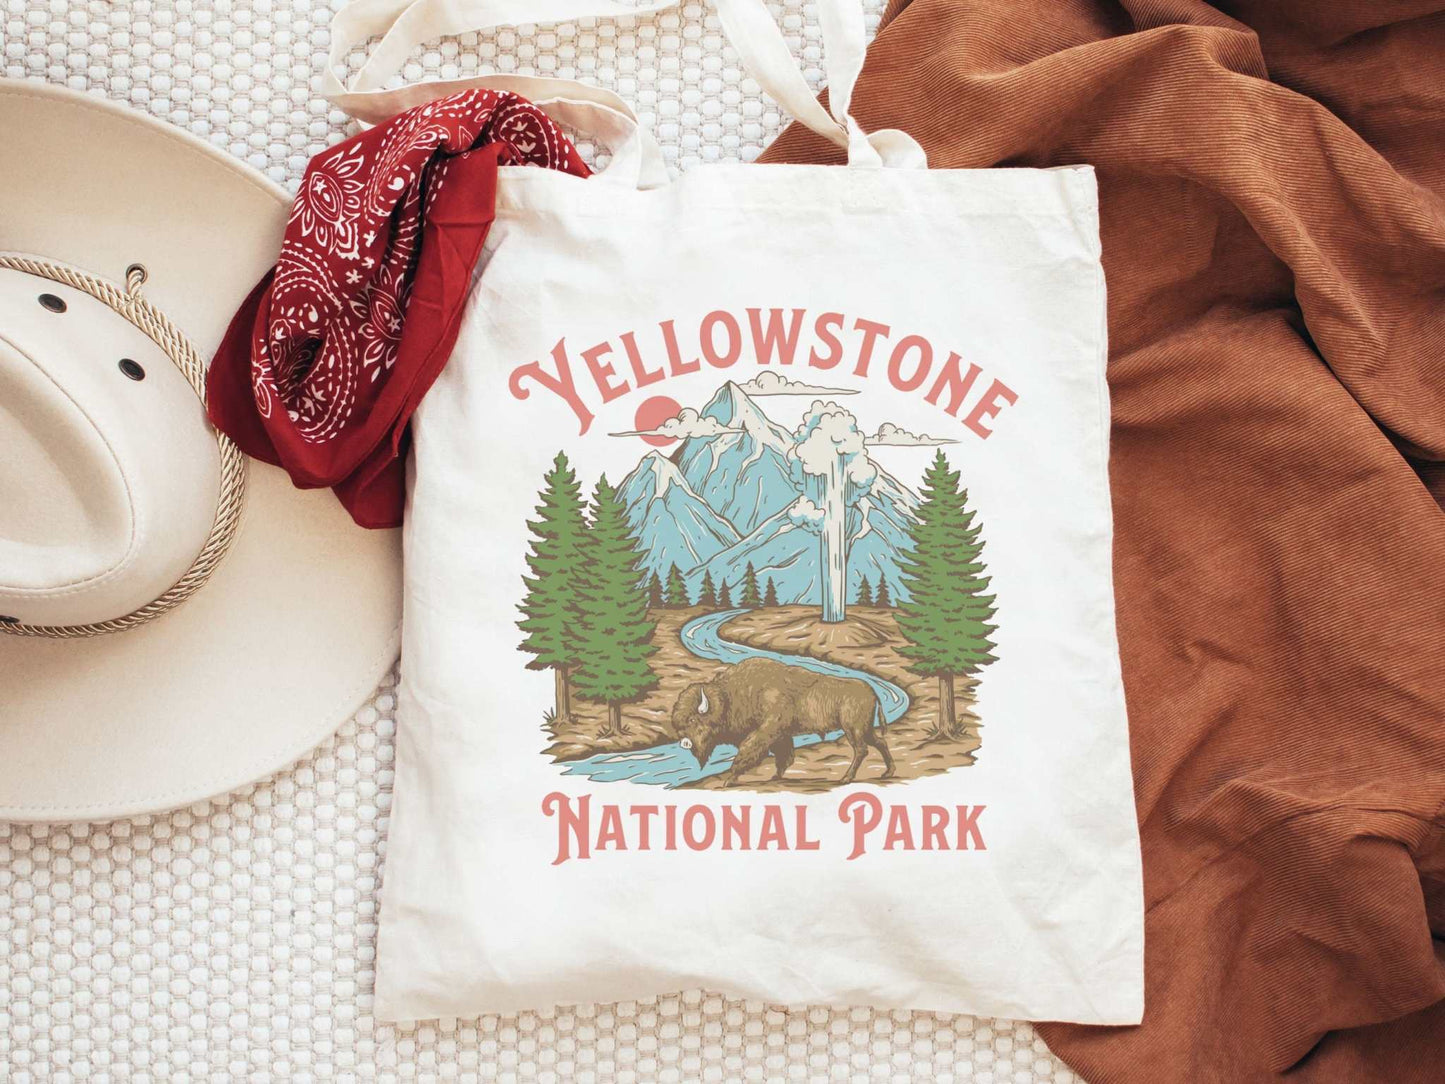 Yellowstone National Park ToteDetails:
- 15.75"h x 15.25"w- handle length of 21.5”- made with 100% recycled cotton sheeting- reinforced handle stitching- lightweight and compact
 
The Lincoln For